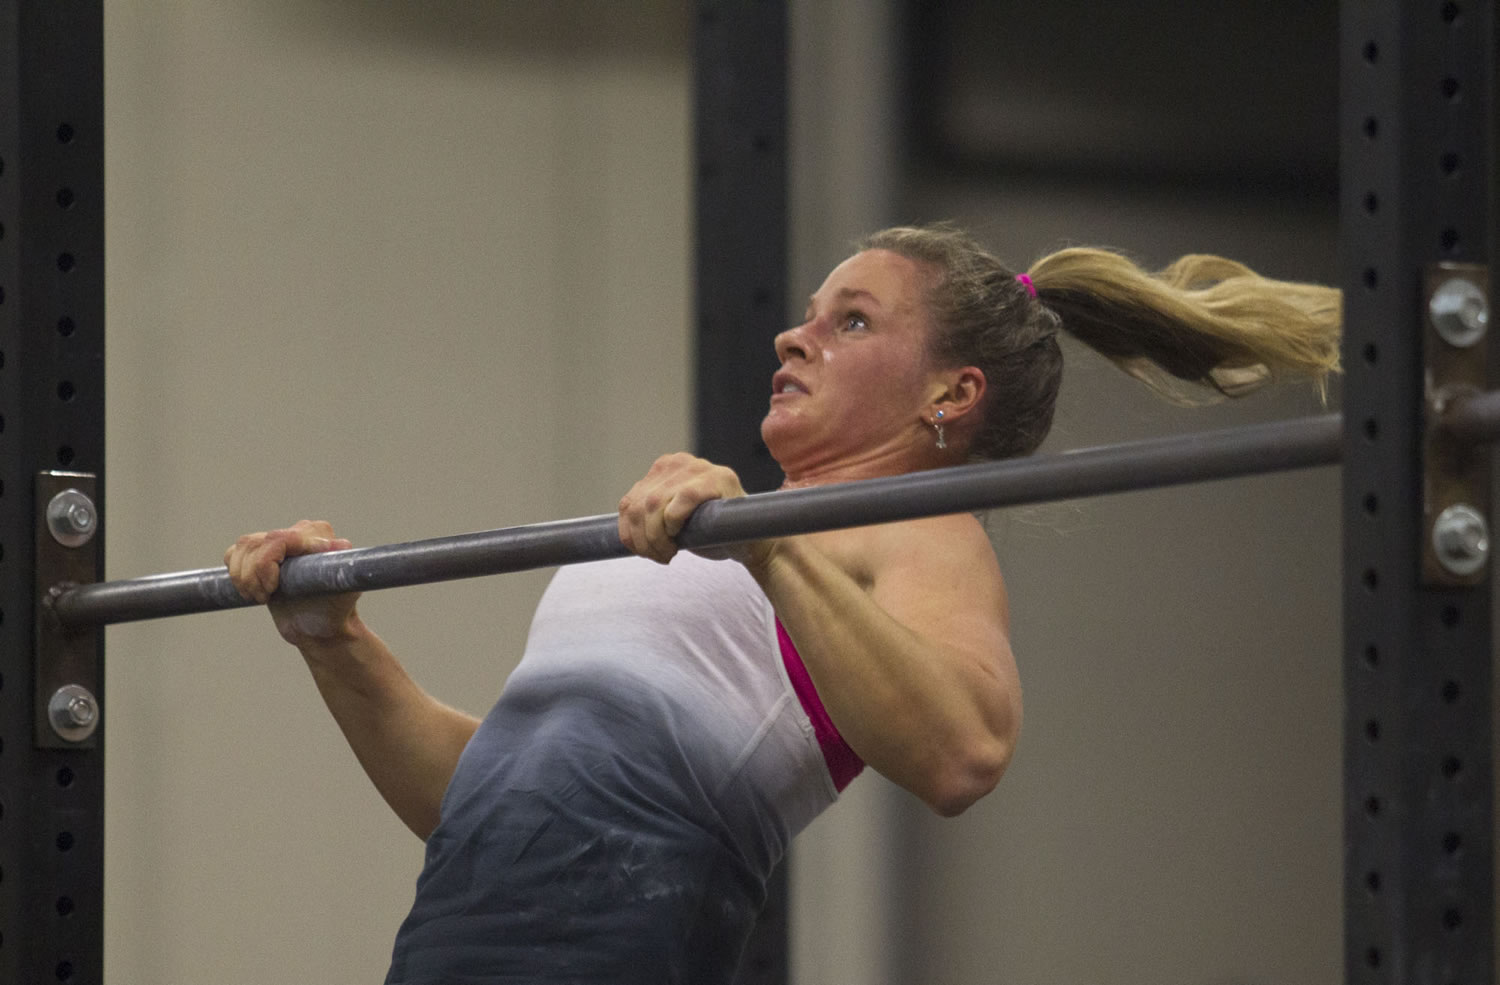 Karen MCcadam does a pull-up as she competes Saturday in the CrossFit Fort Vancouver Invitational at the Clark County Event Center at the Fairgrounds in Ridgefield.